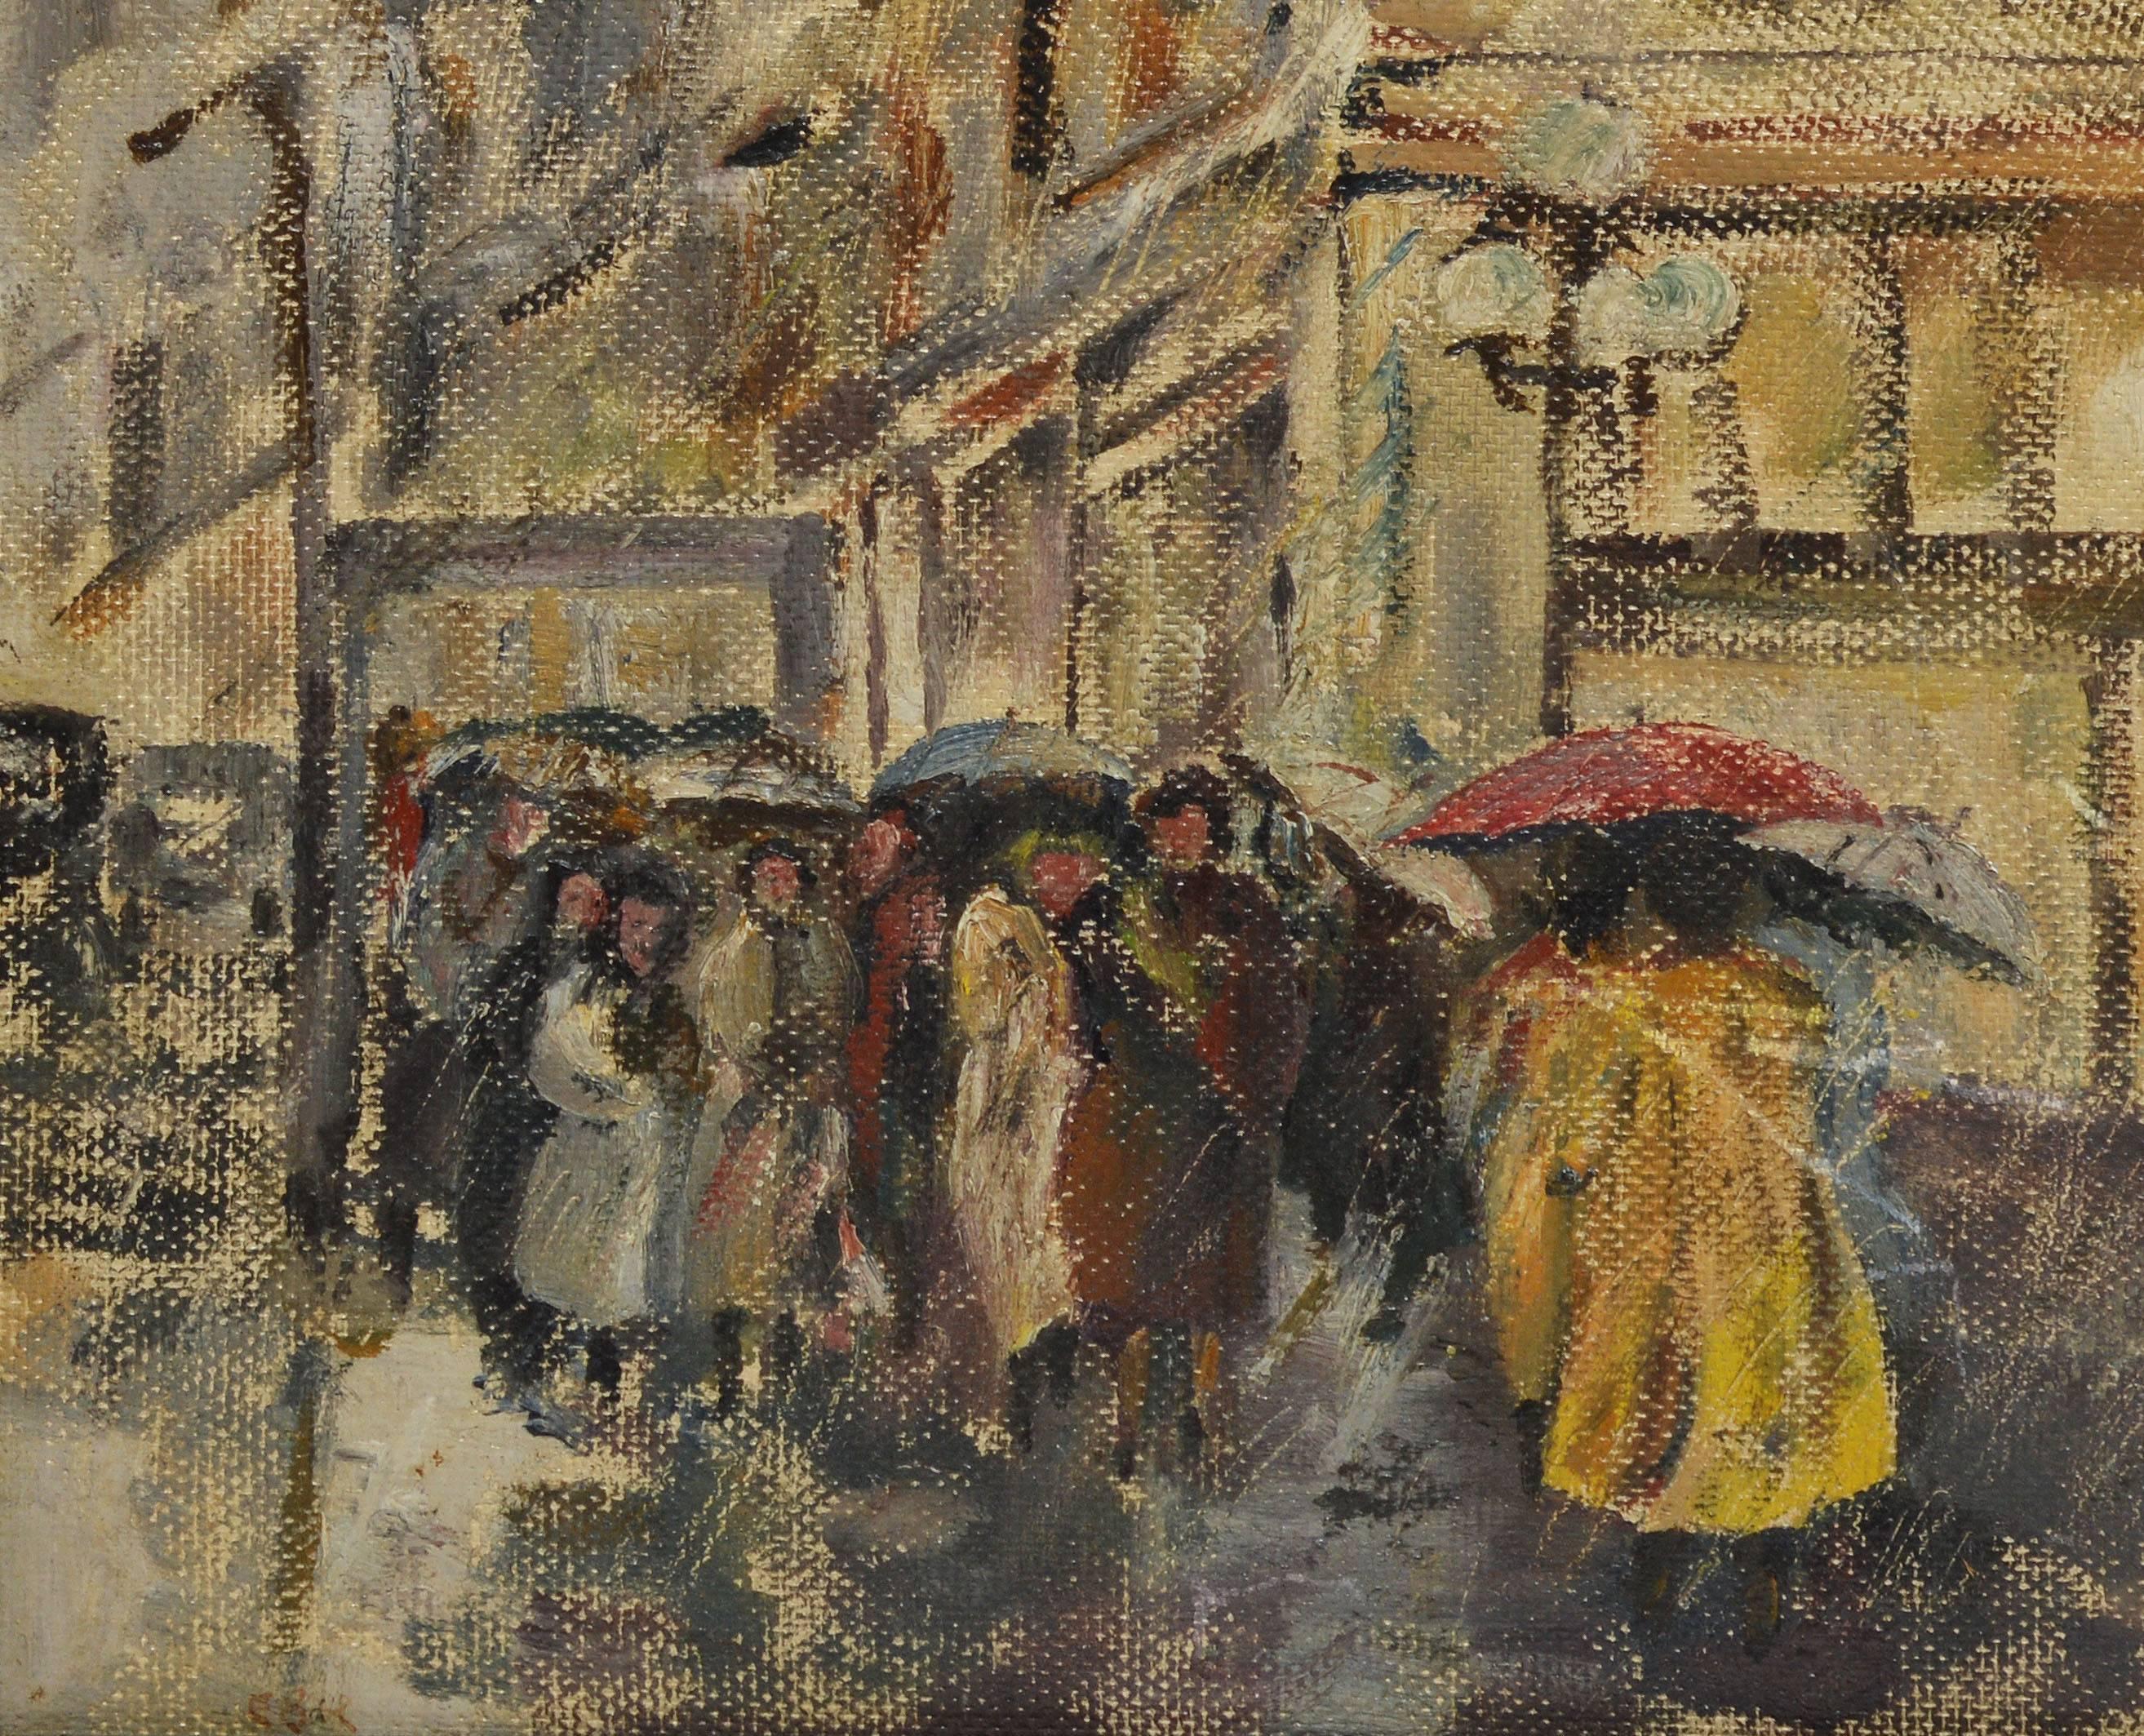 Impressionist view of a rainy street. Oil on board, circa 1940. Signed lower right, 